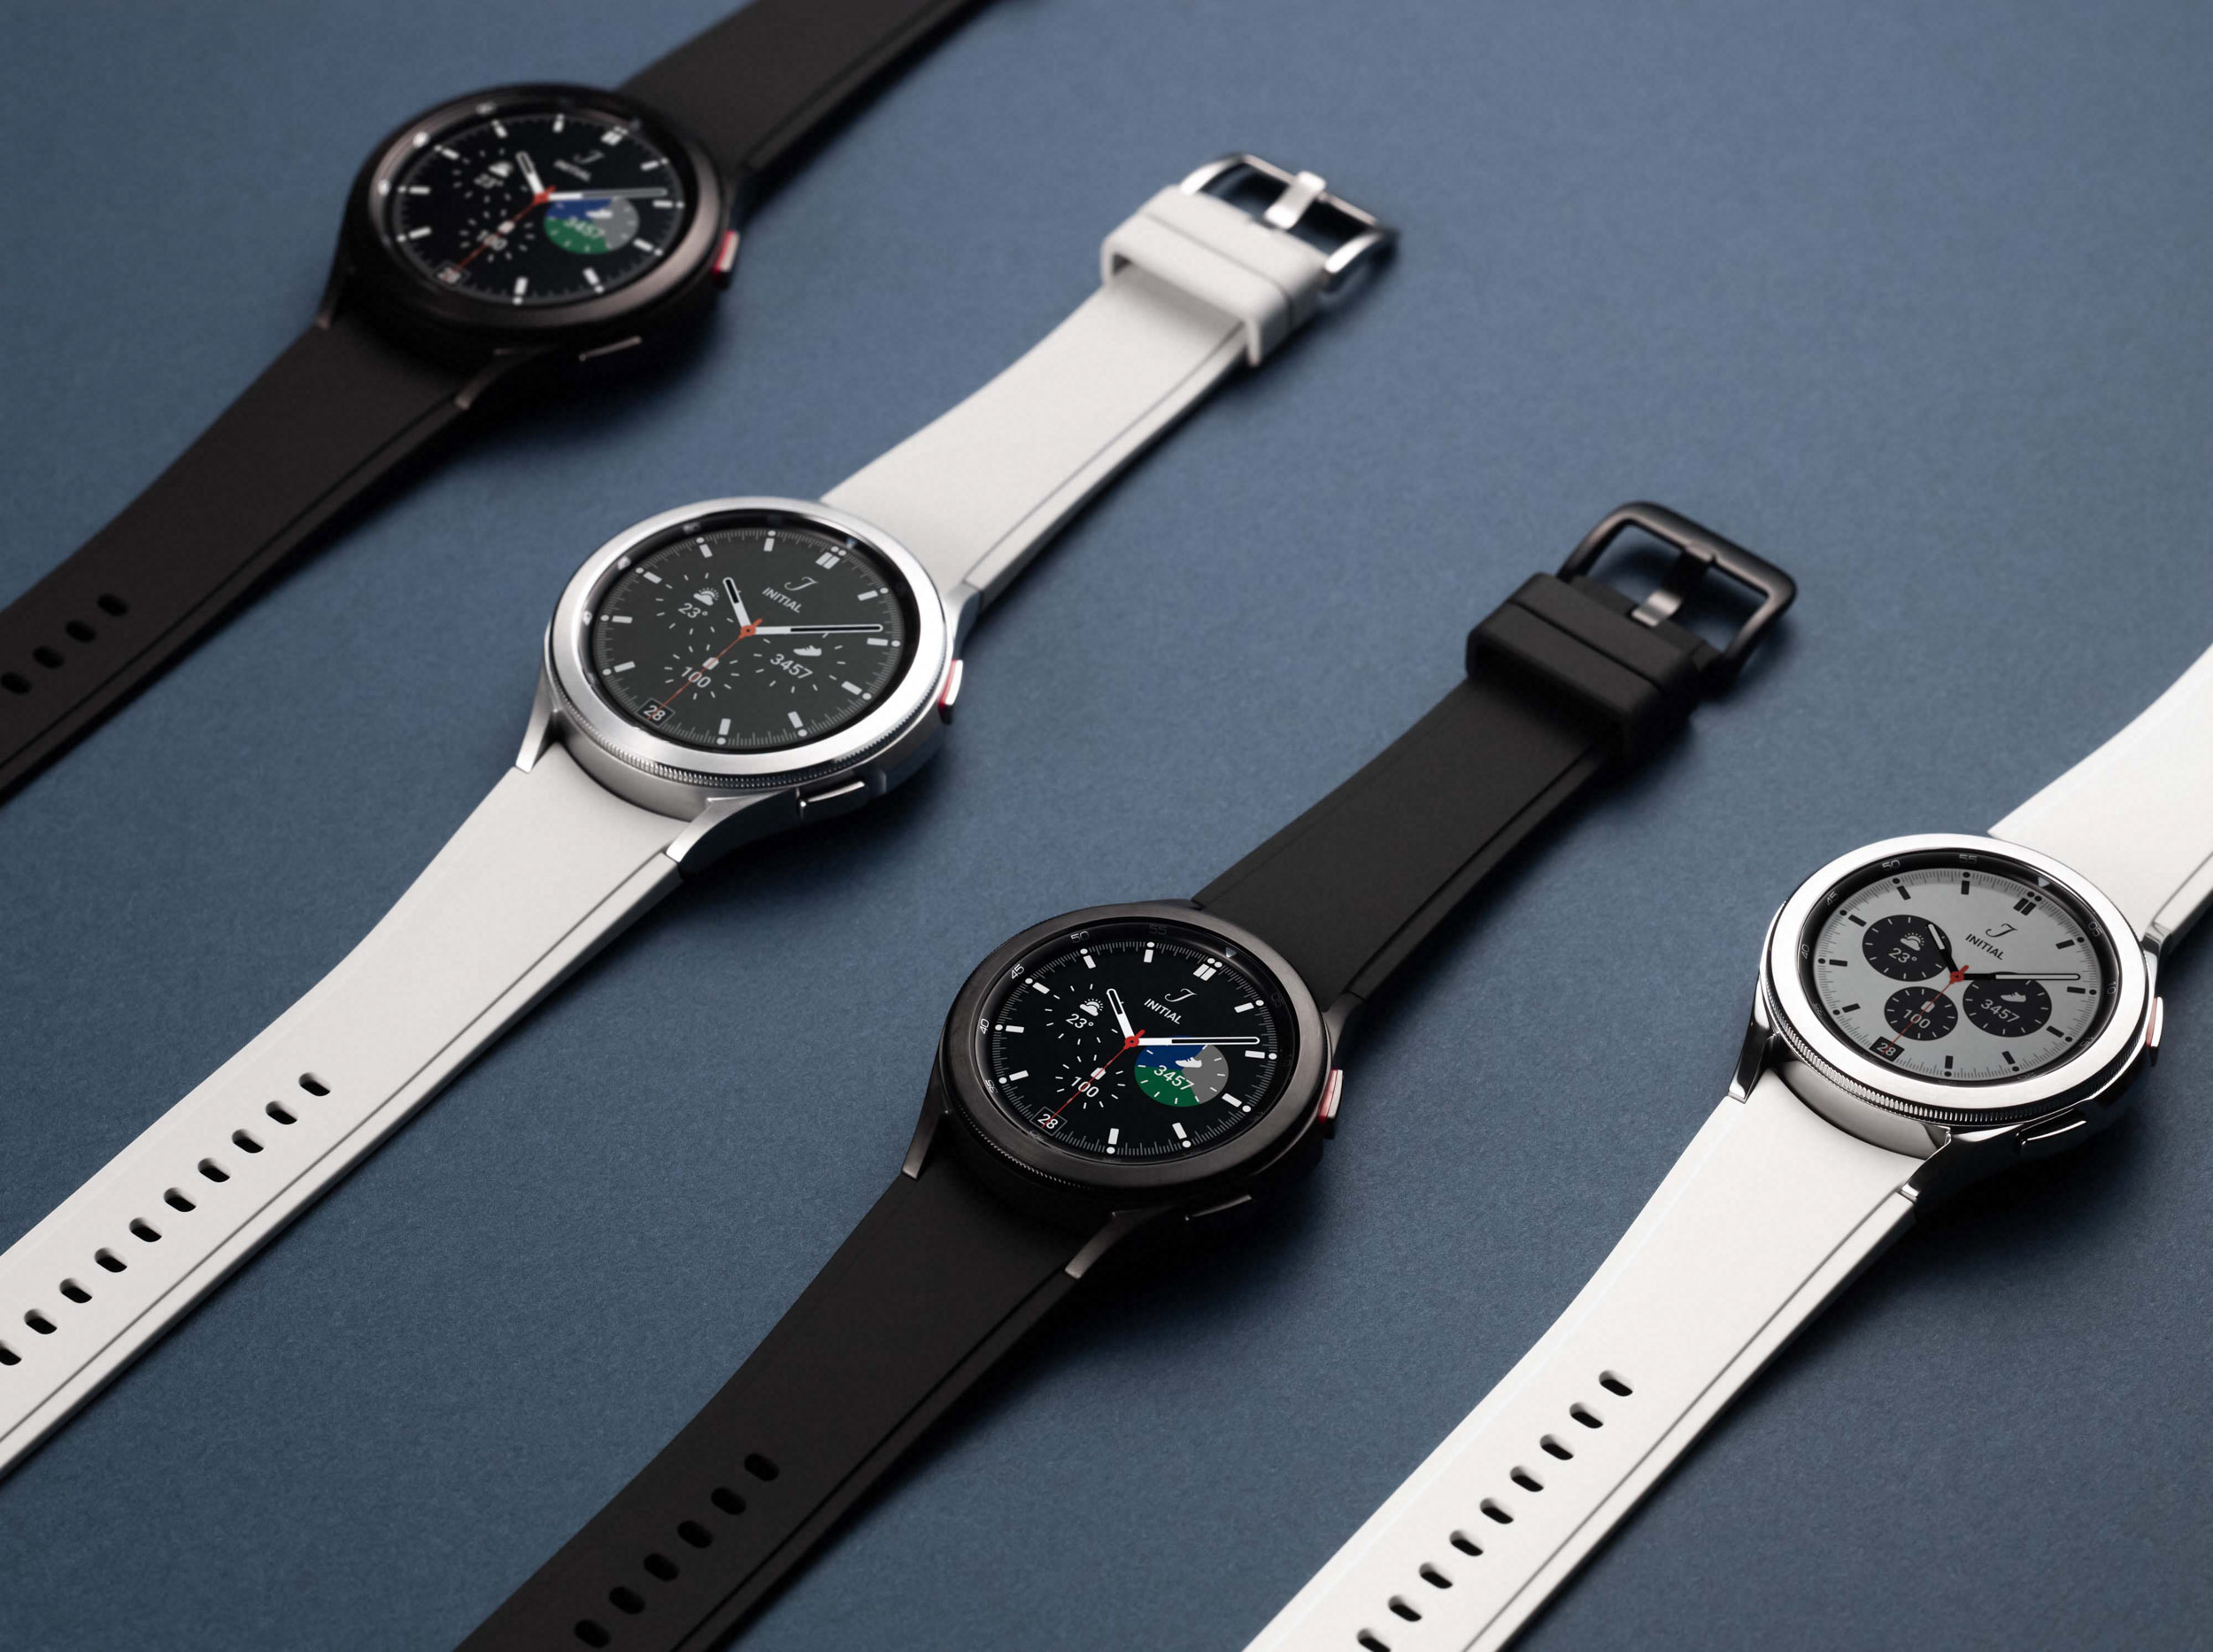 Google Assistant Will Soon be Available for the Galaxy Watch 4